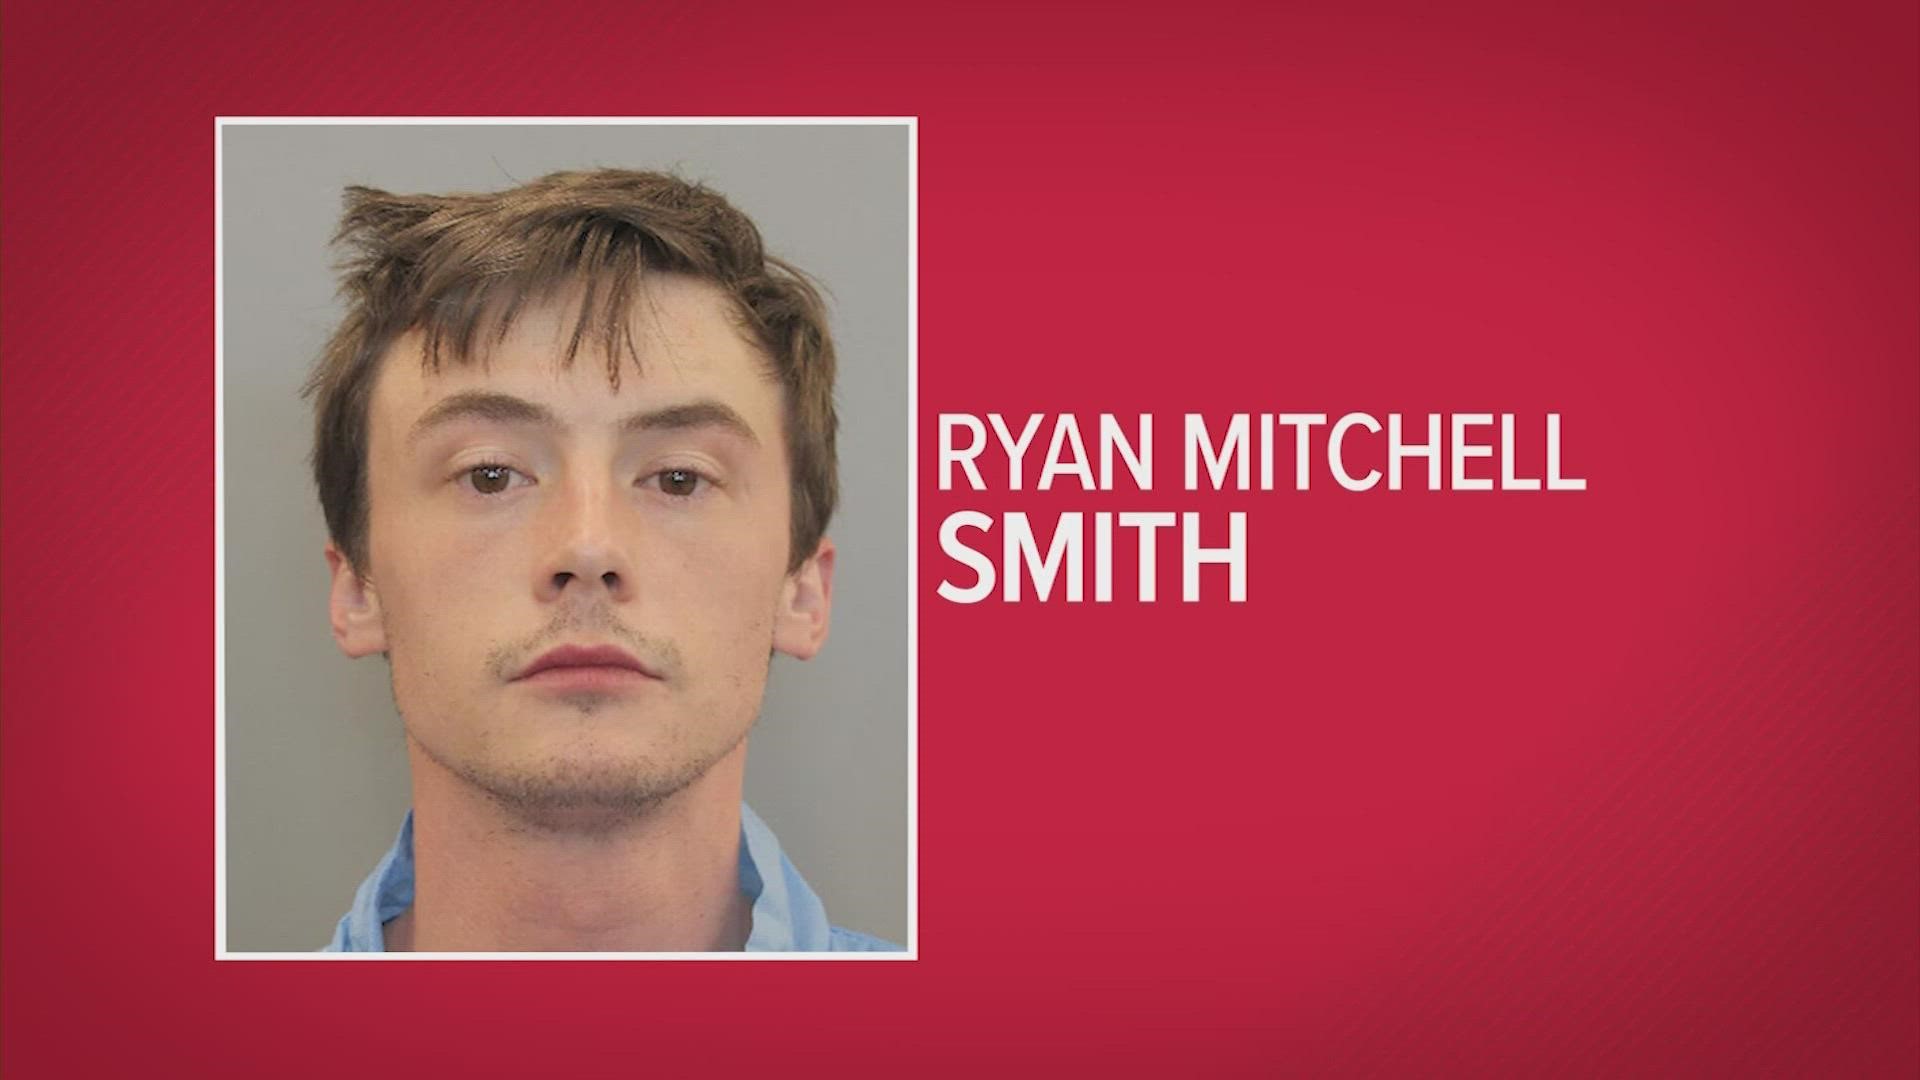 Police say Ryan Mitchell Smith was taken into custody Tuesday afternoon when authorities found him walking along Highway 159 in Waller County.